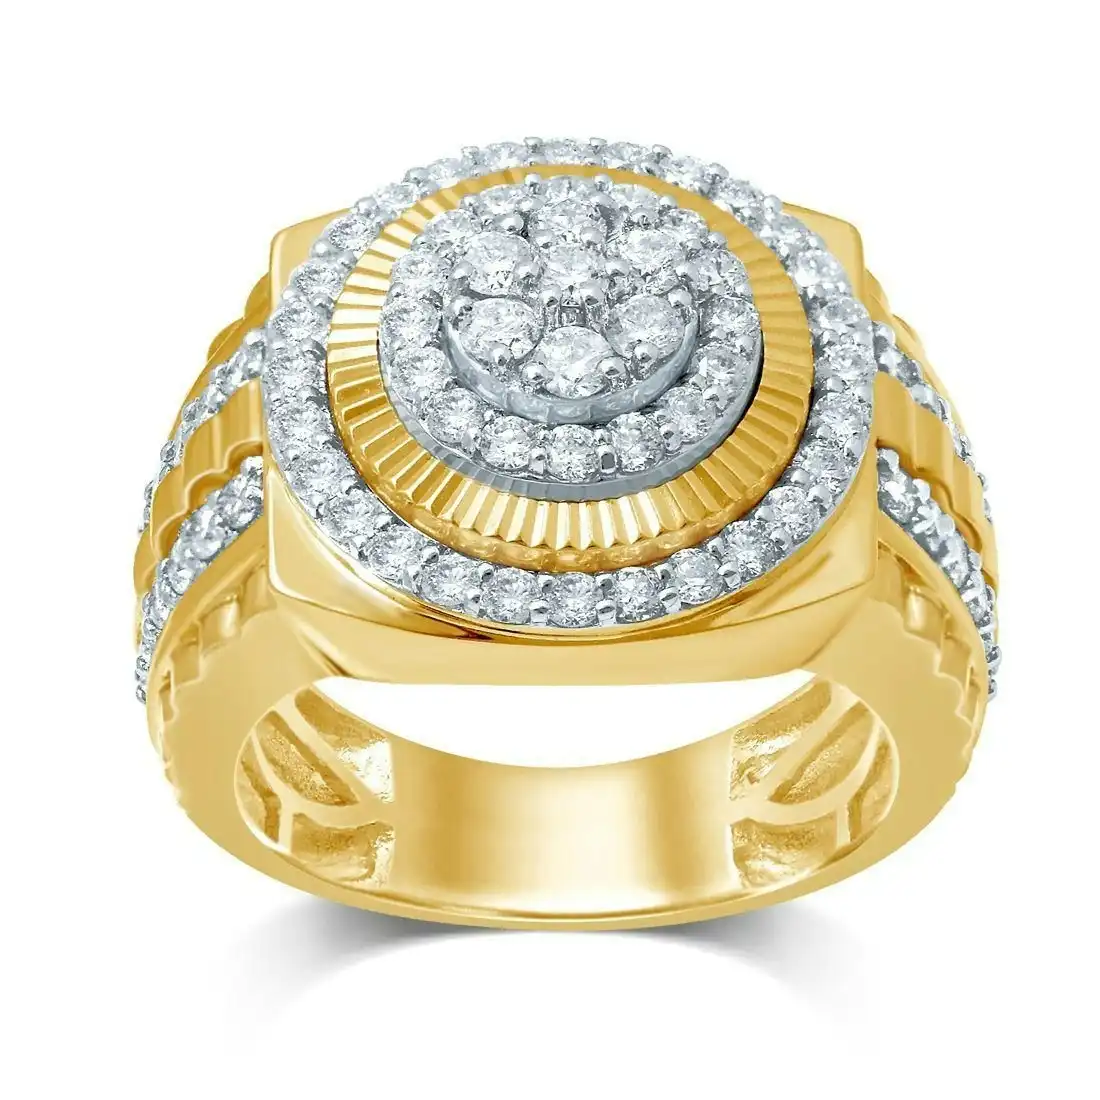 Men's Fancy Ring with 1.50ct of Diamonds in 9ct Yellow Gold